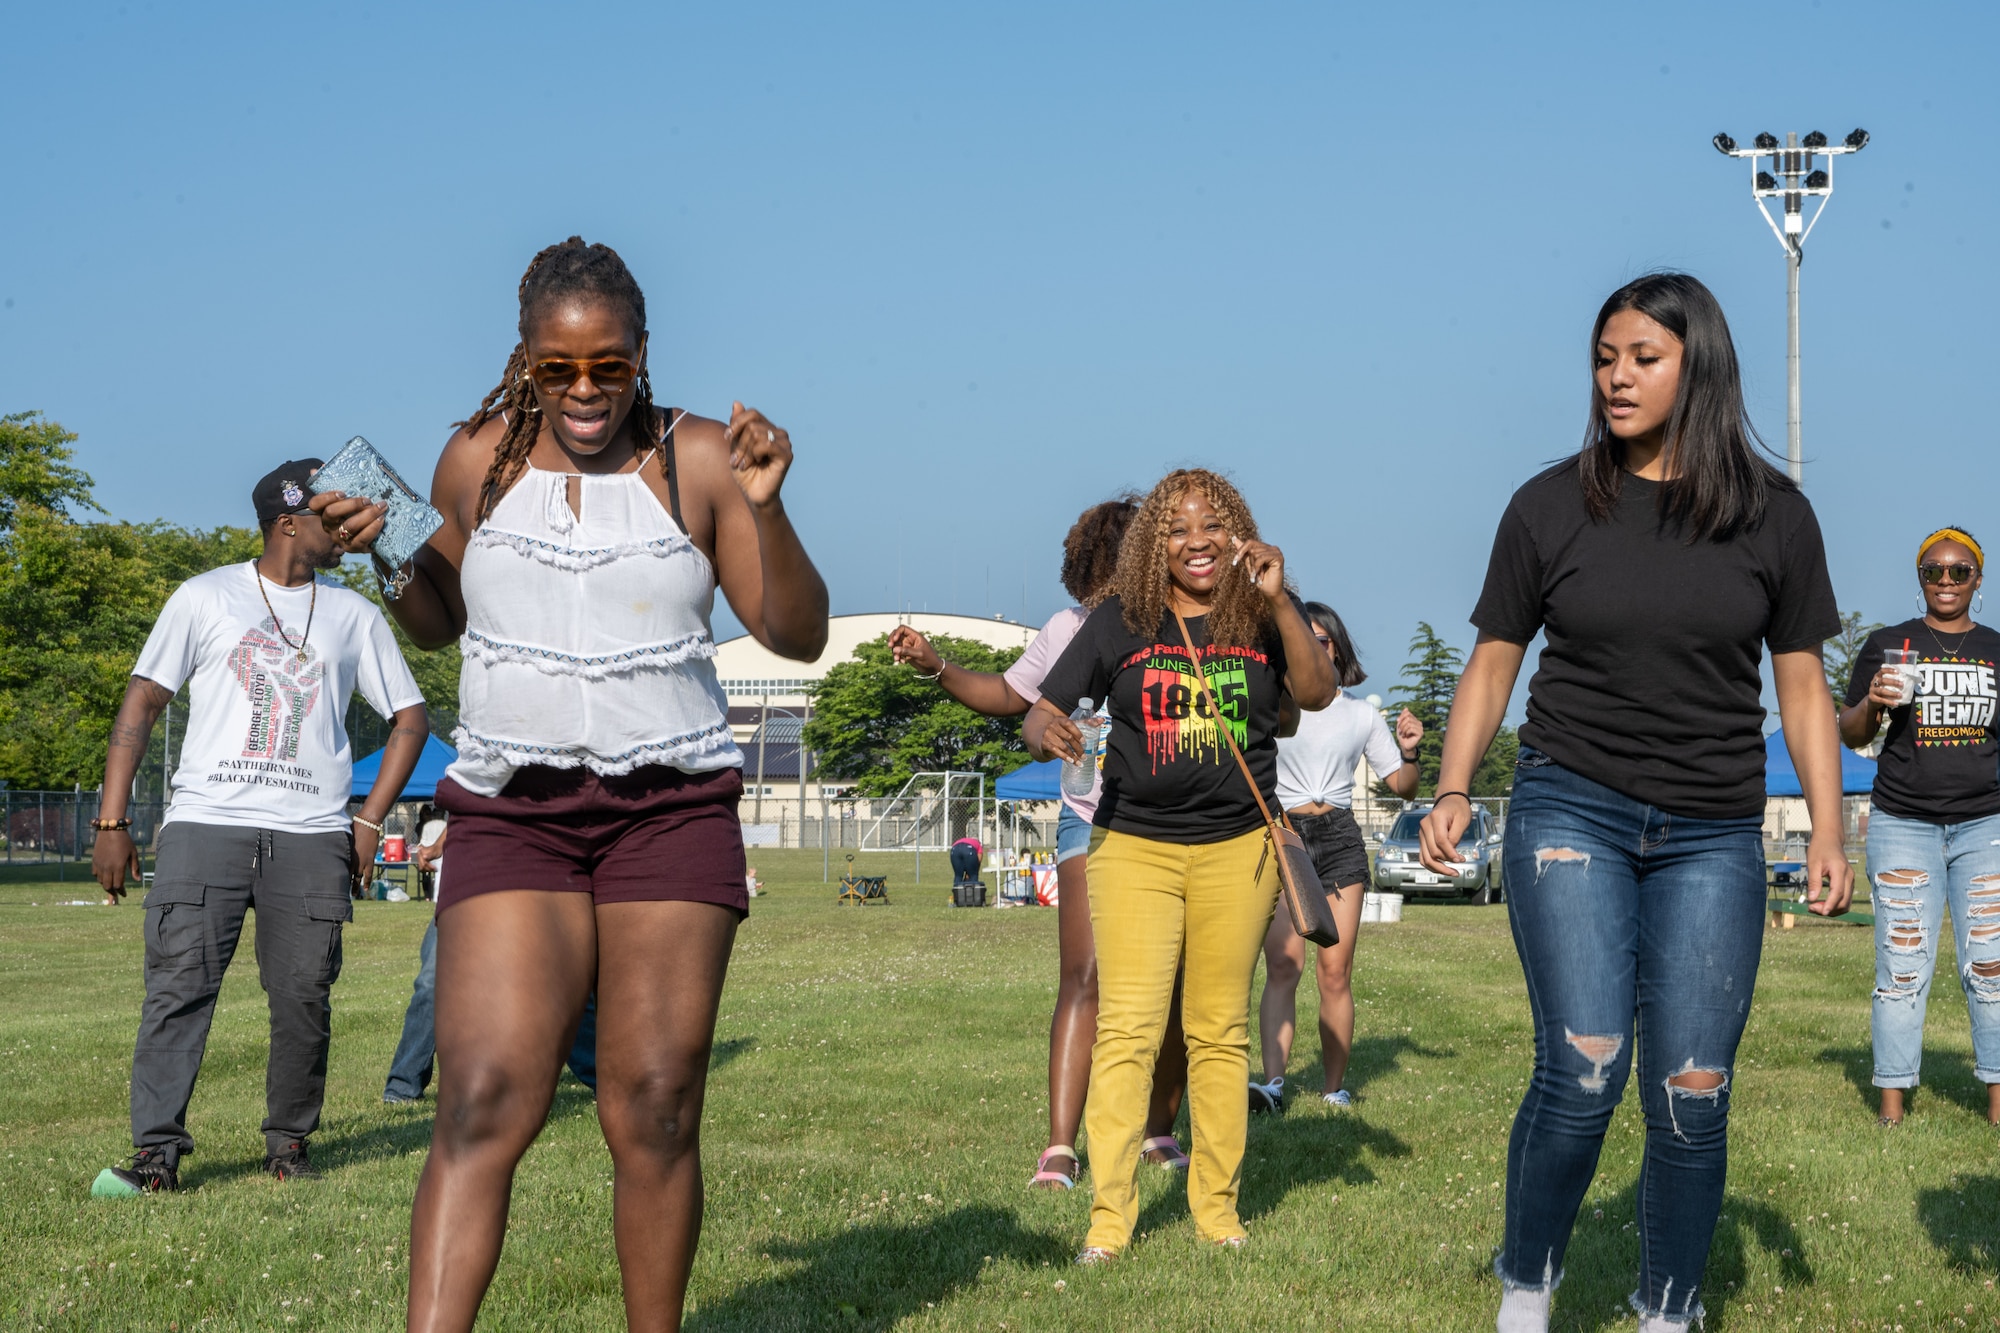 Members from Team Misawa dance during the Juneteenth Family Reunion event at Misawa Air Base, Japan, June 18, 2022.